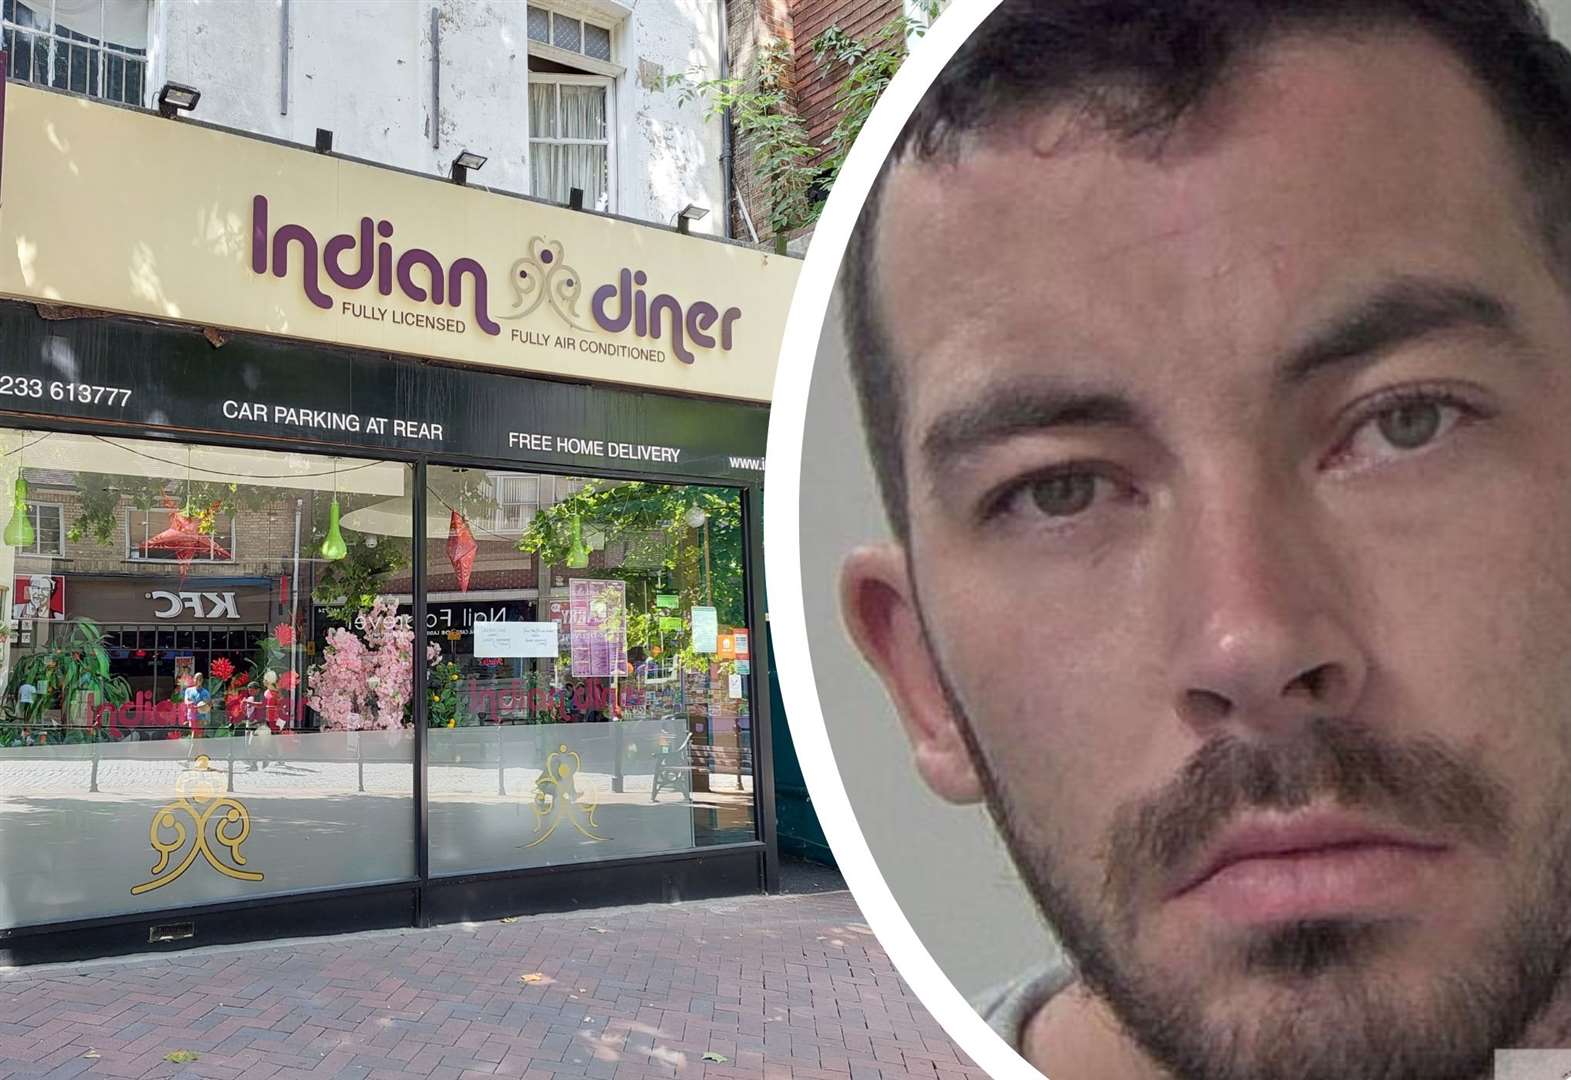 Dad smashed up curry house and threatened to stab owner with cutlery